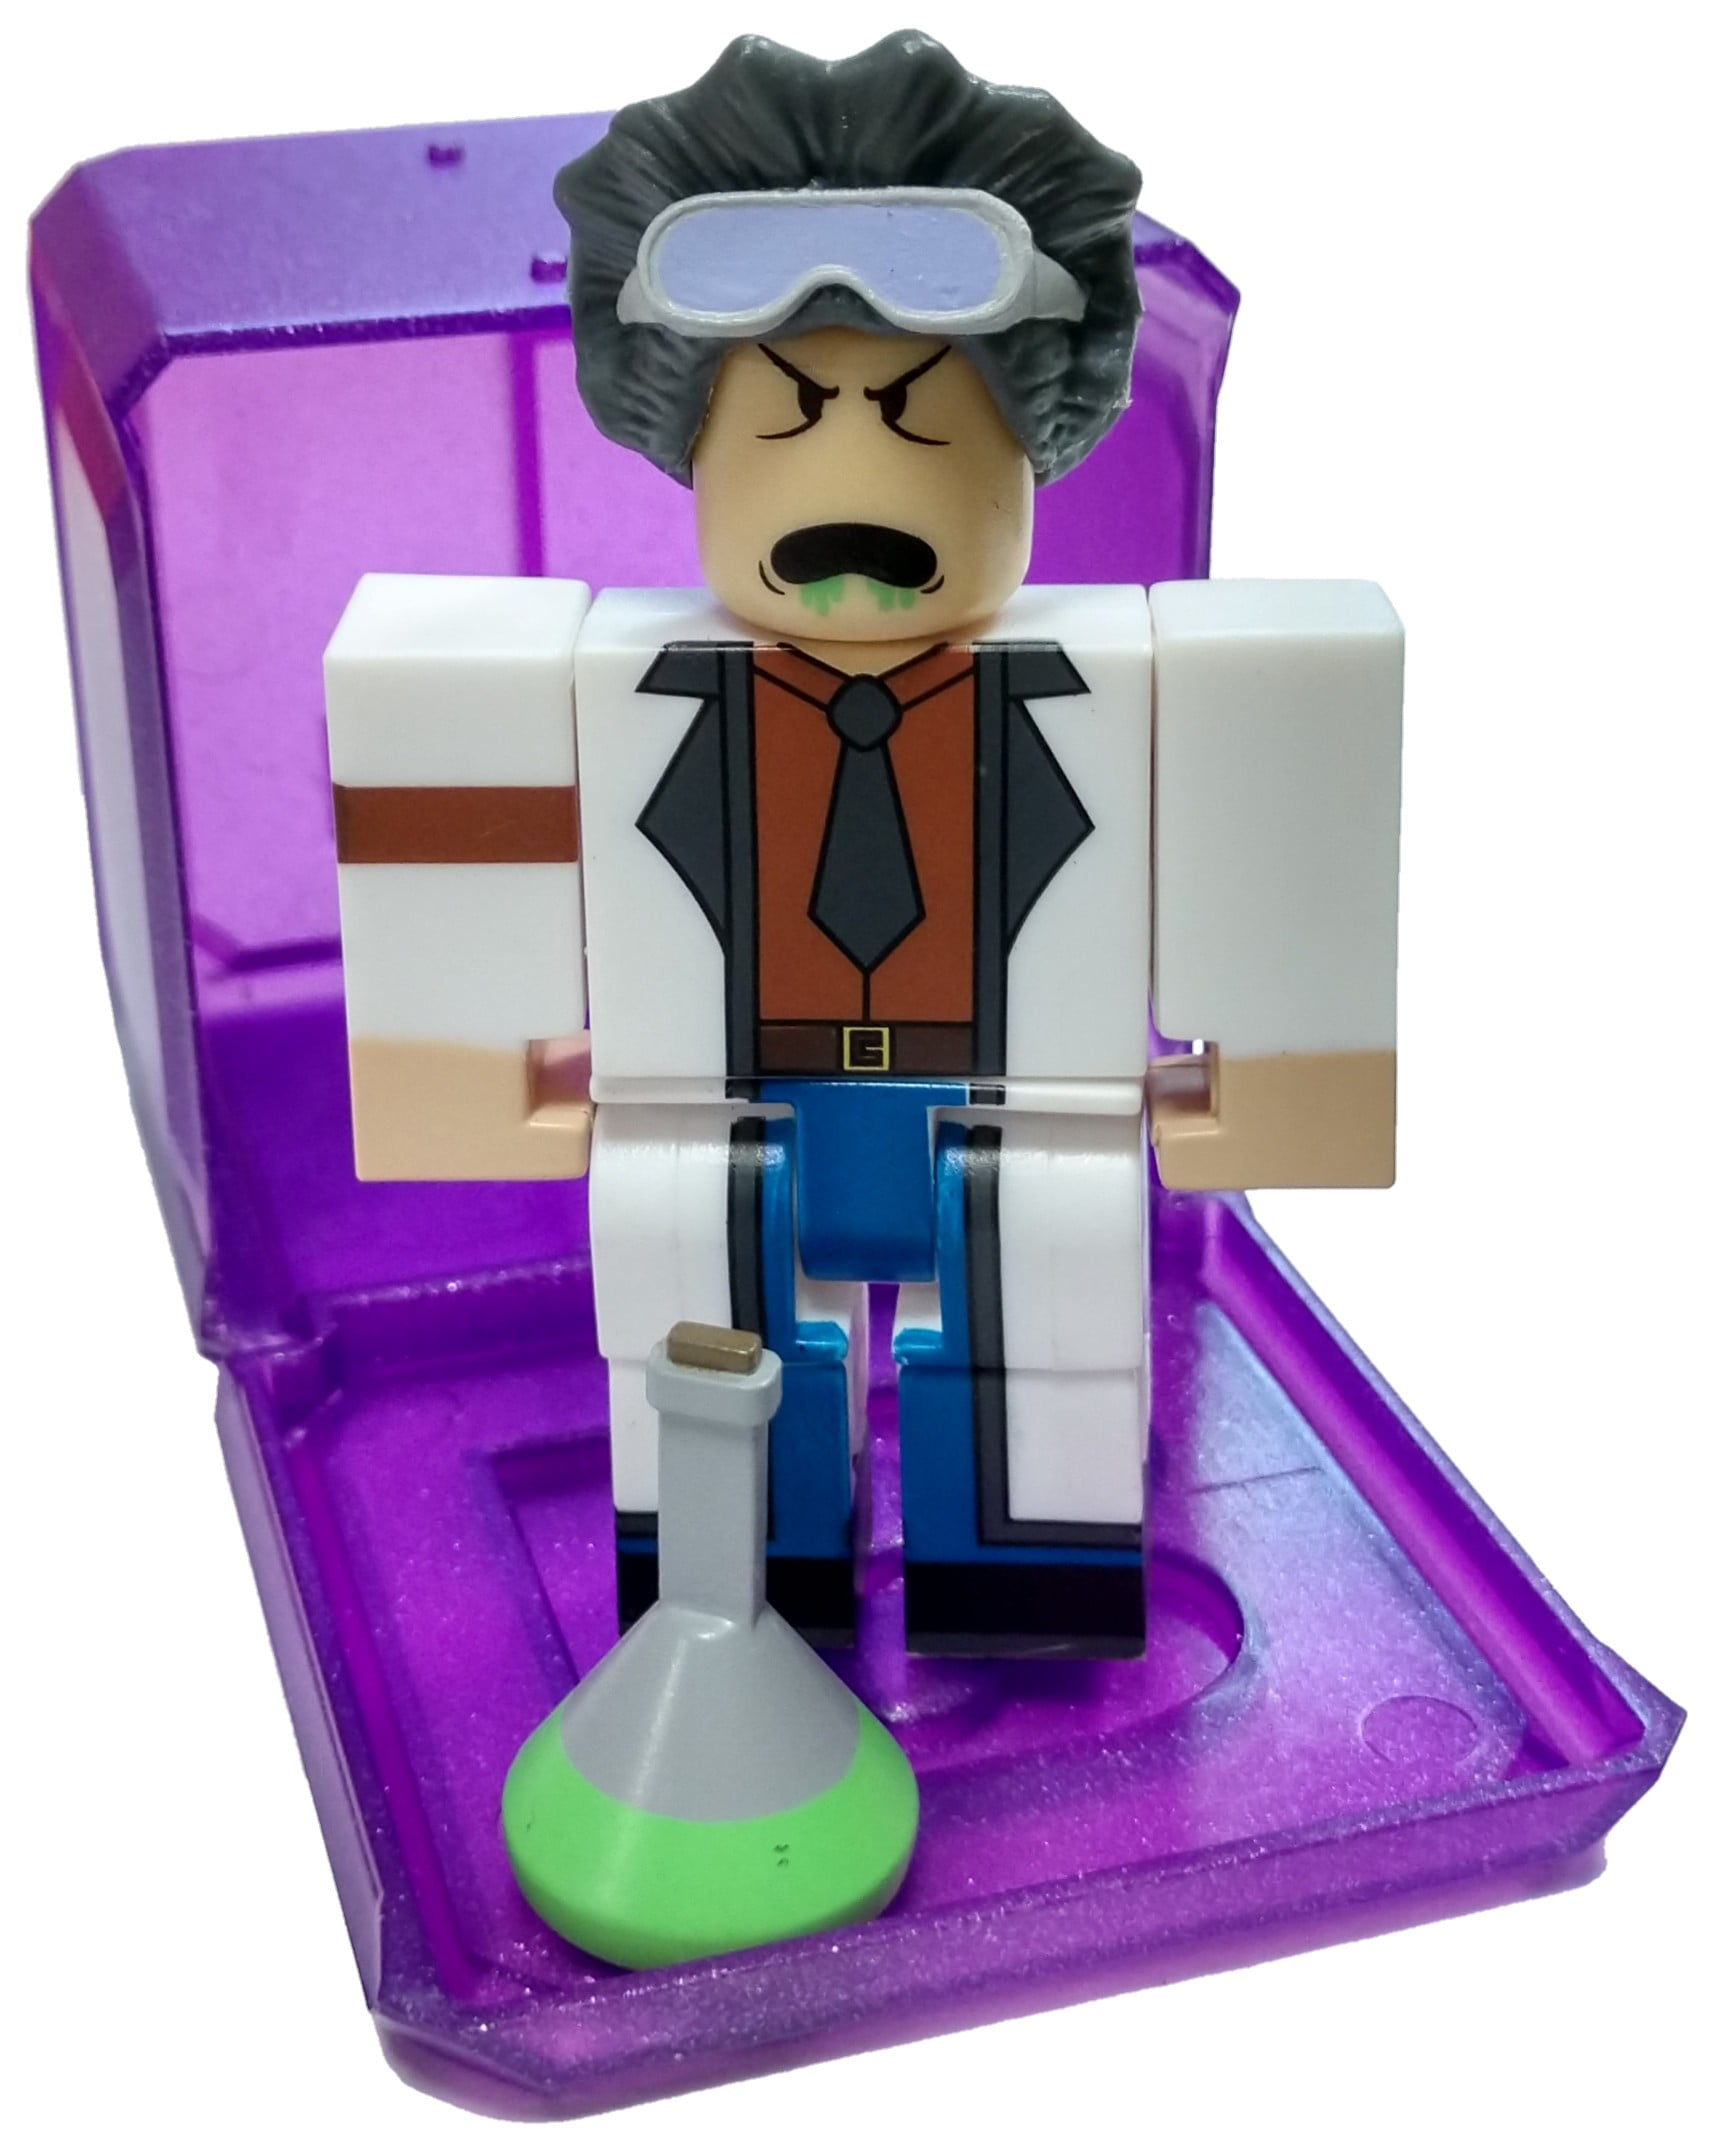 Roblox Celebrity Collection Series 3 Innovation Industries Scientist Zombie Mini Figure With Cube And Online Code No Packaging Walmart Com Walmart Com - zombie legendary roblox toys